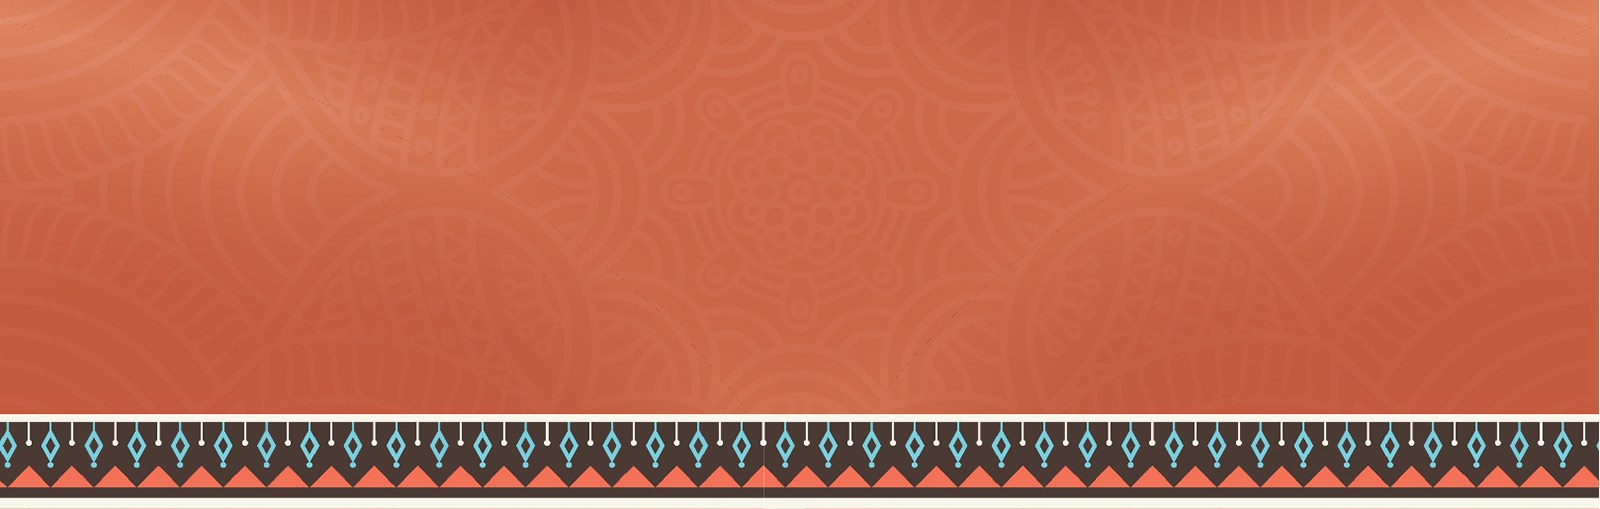 Primarily orange graphic that has shadowed motifs throughout. Brown and blue decorative edging resembling beadwork at the bottom. 